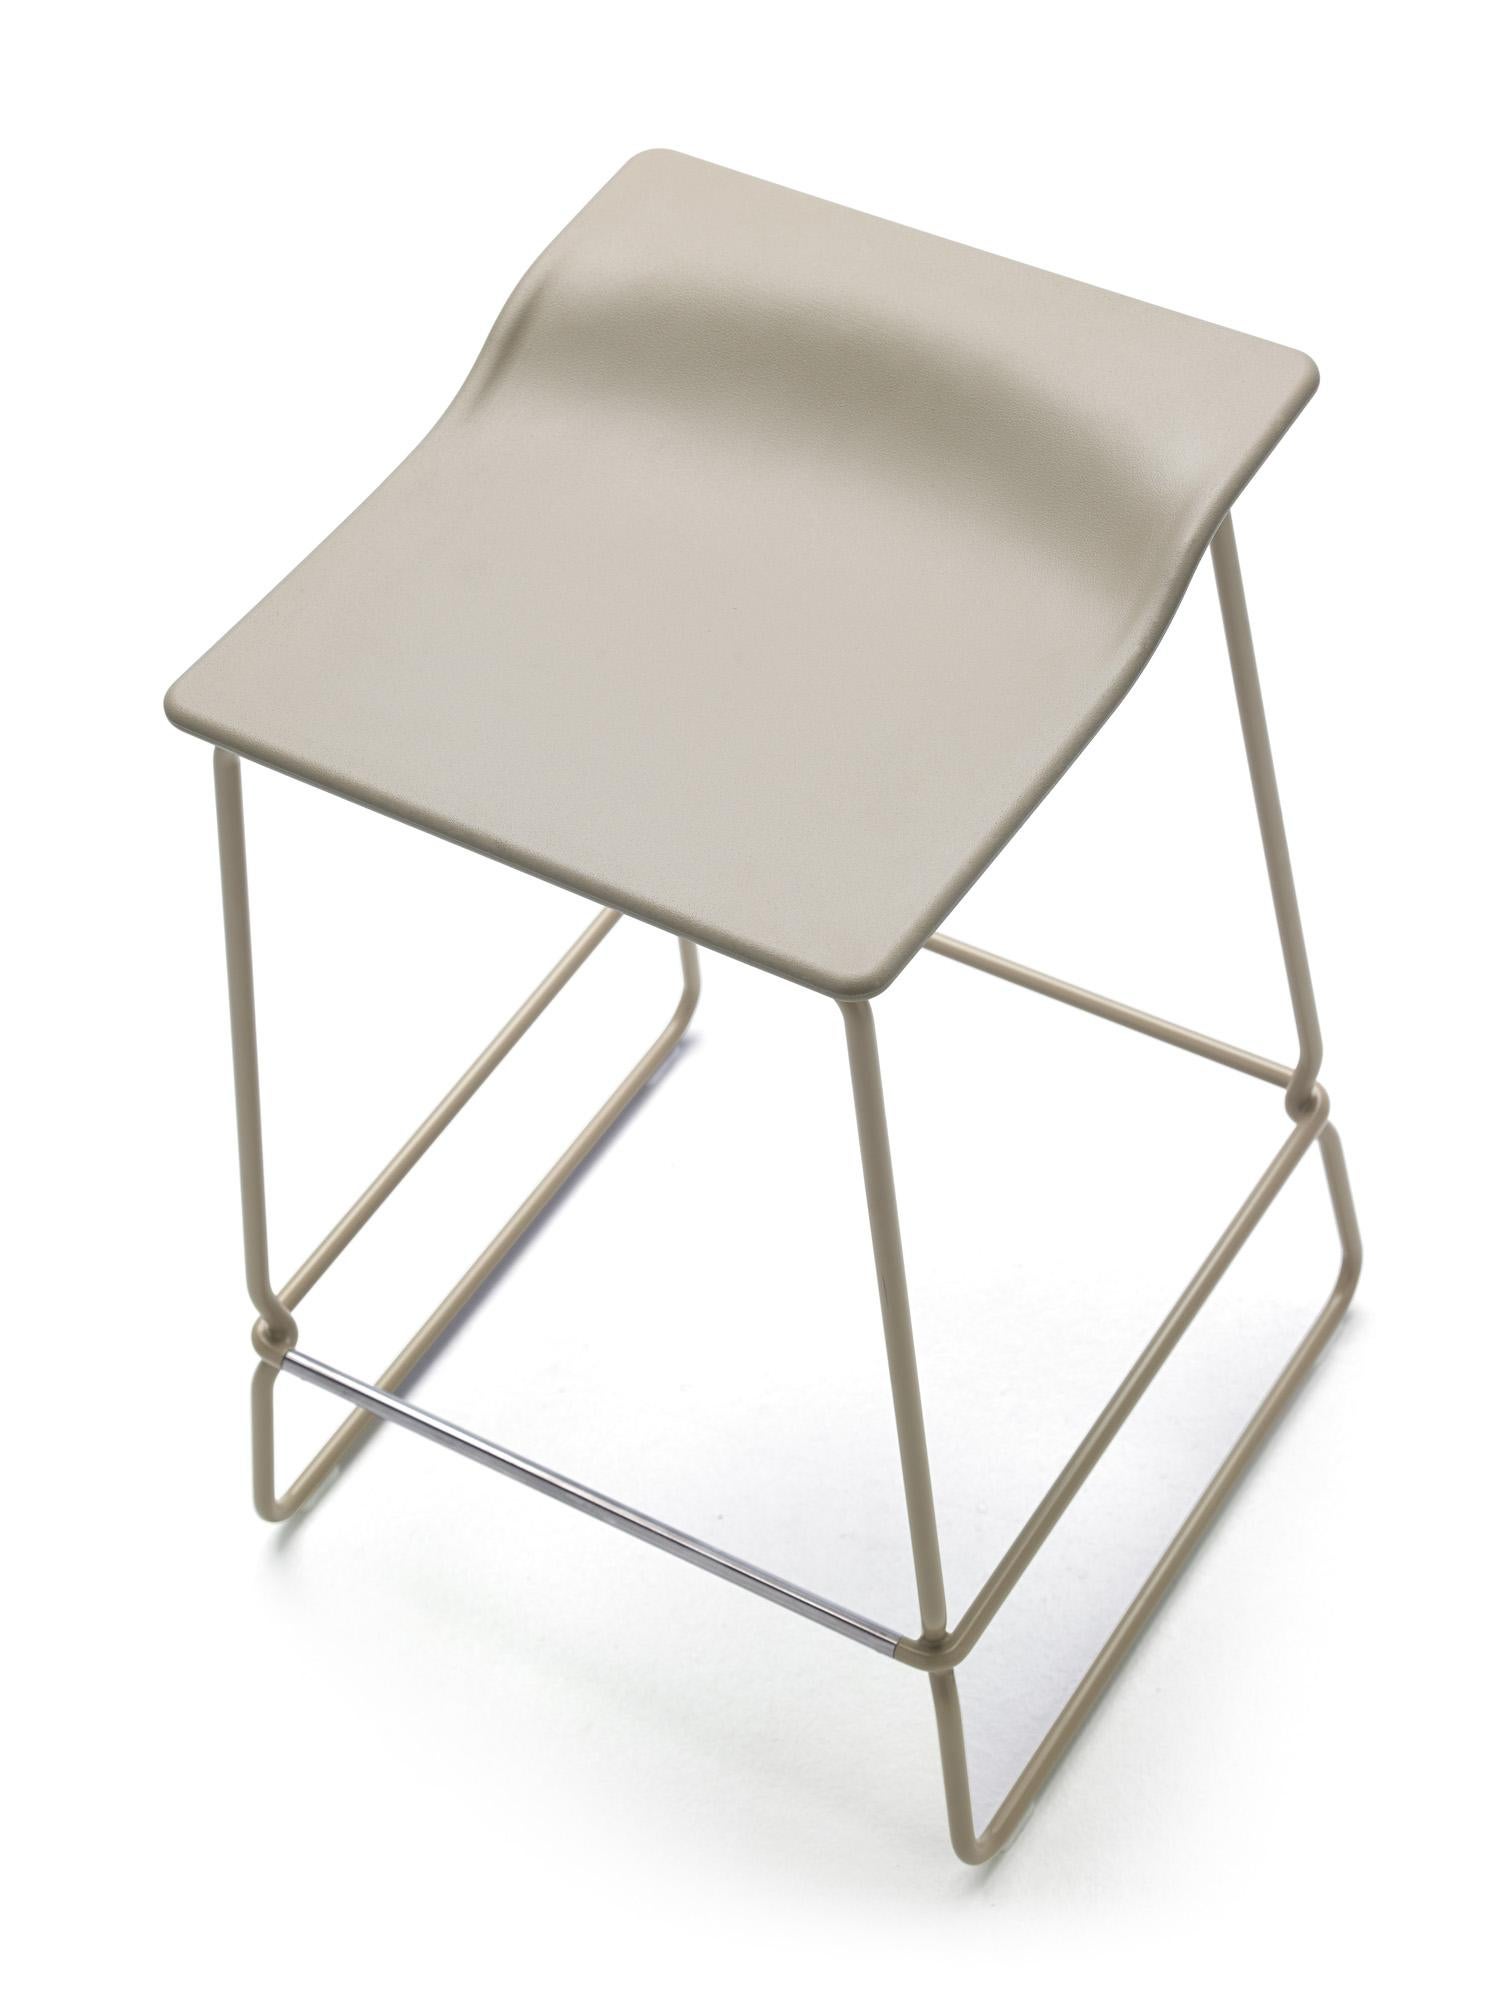 Spanish Viccarbe Last Minute Stool by Patricia Urquiola, White For Sale